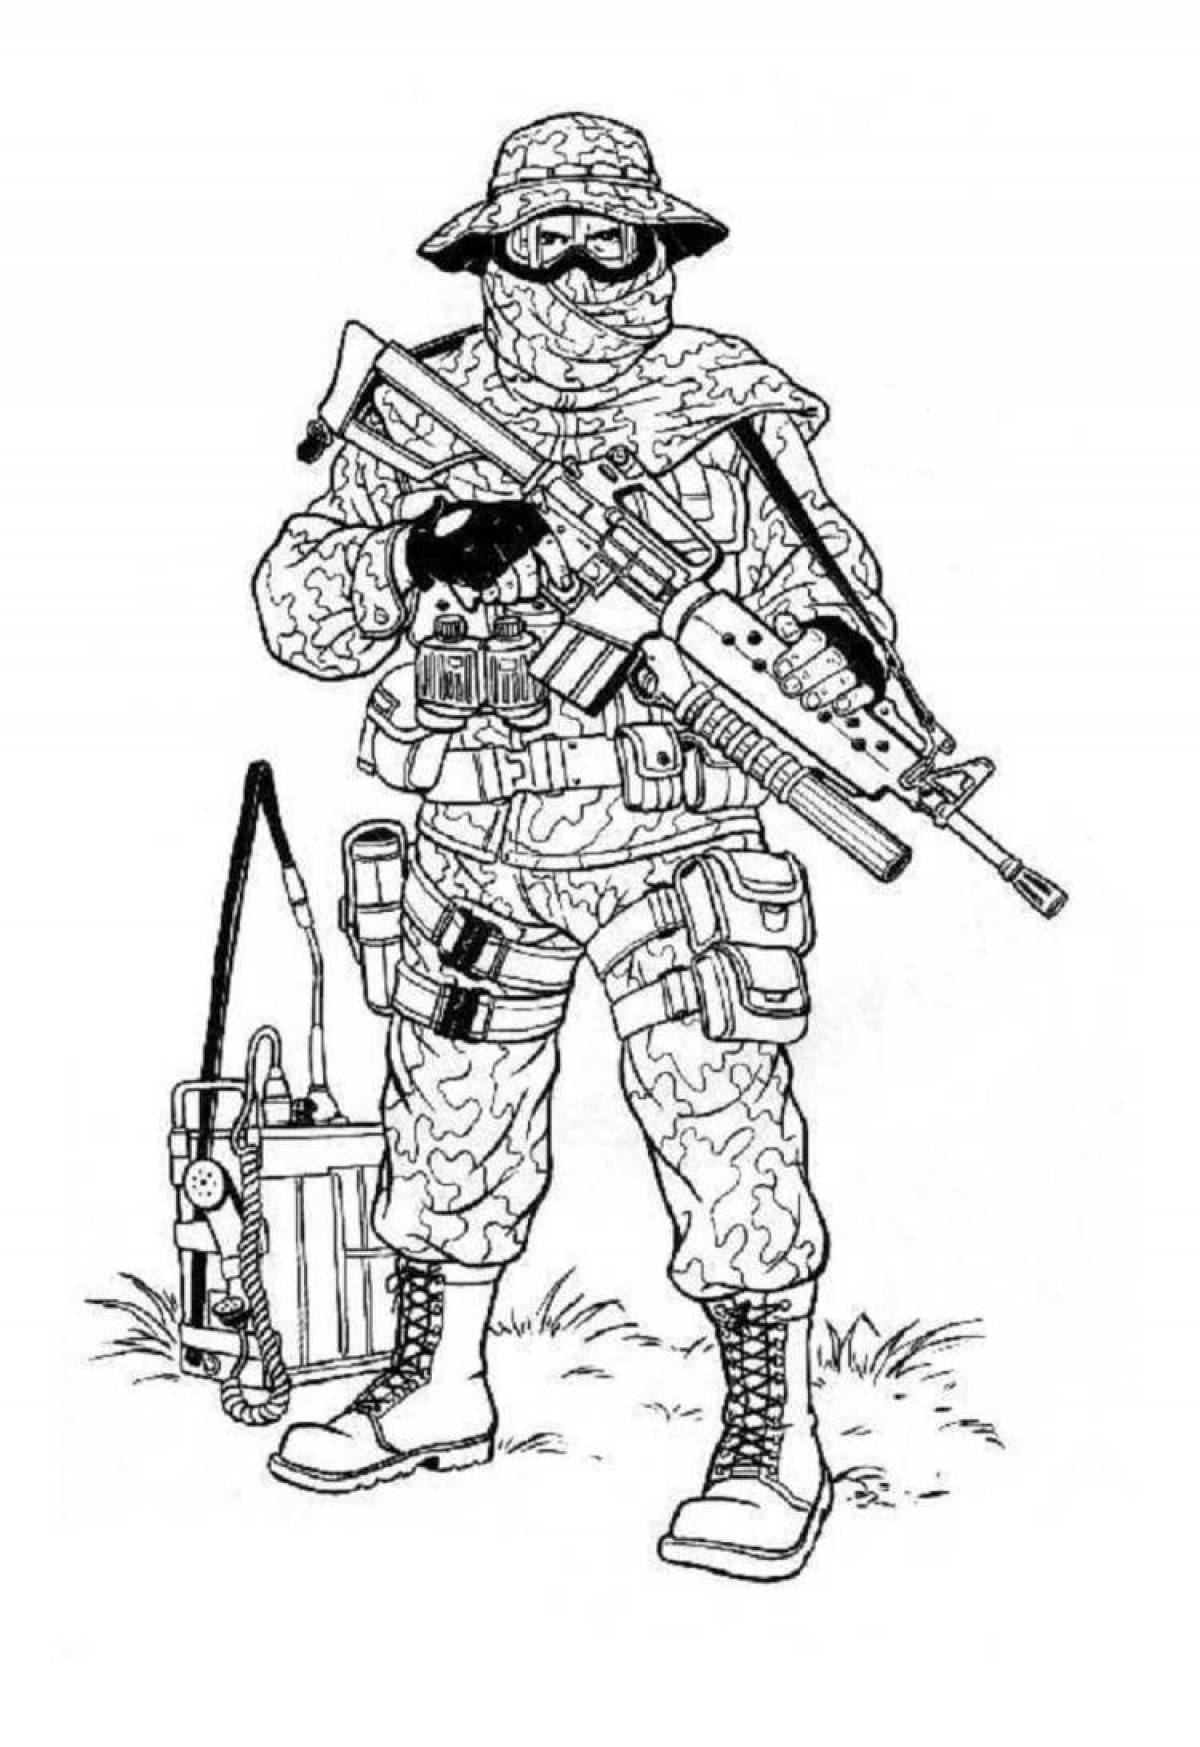 Fantastic special forces coloring book for kids